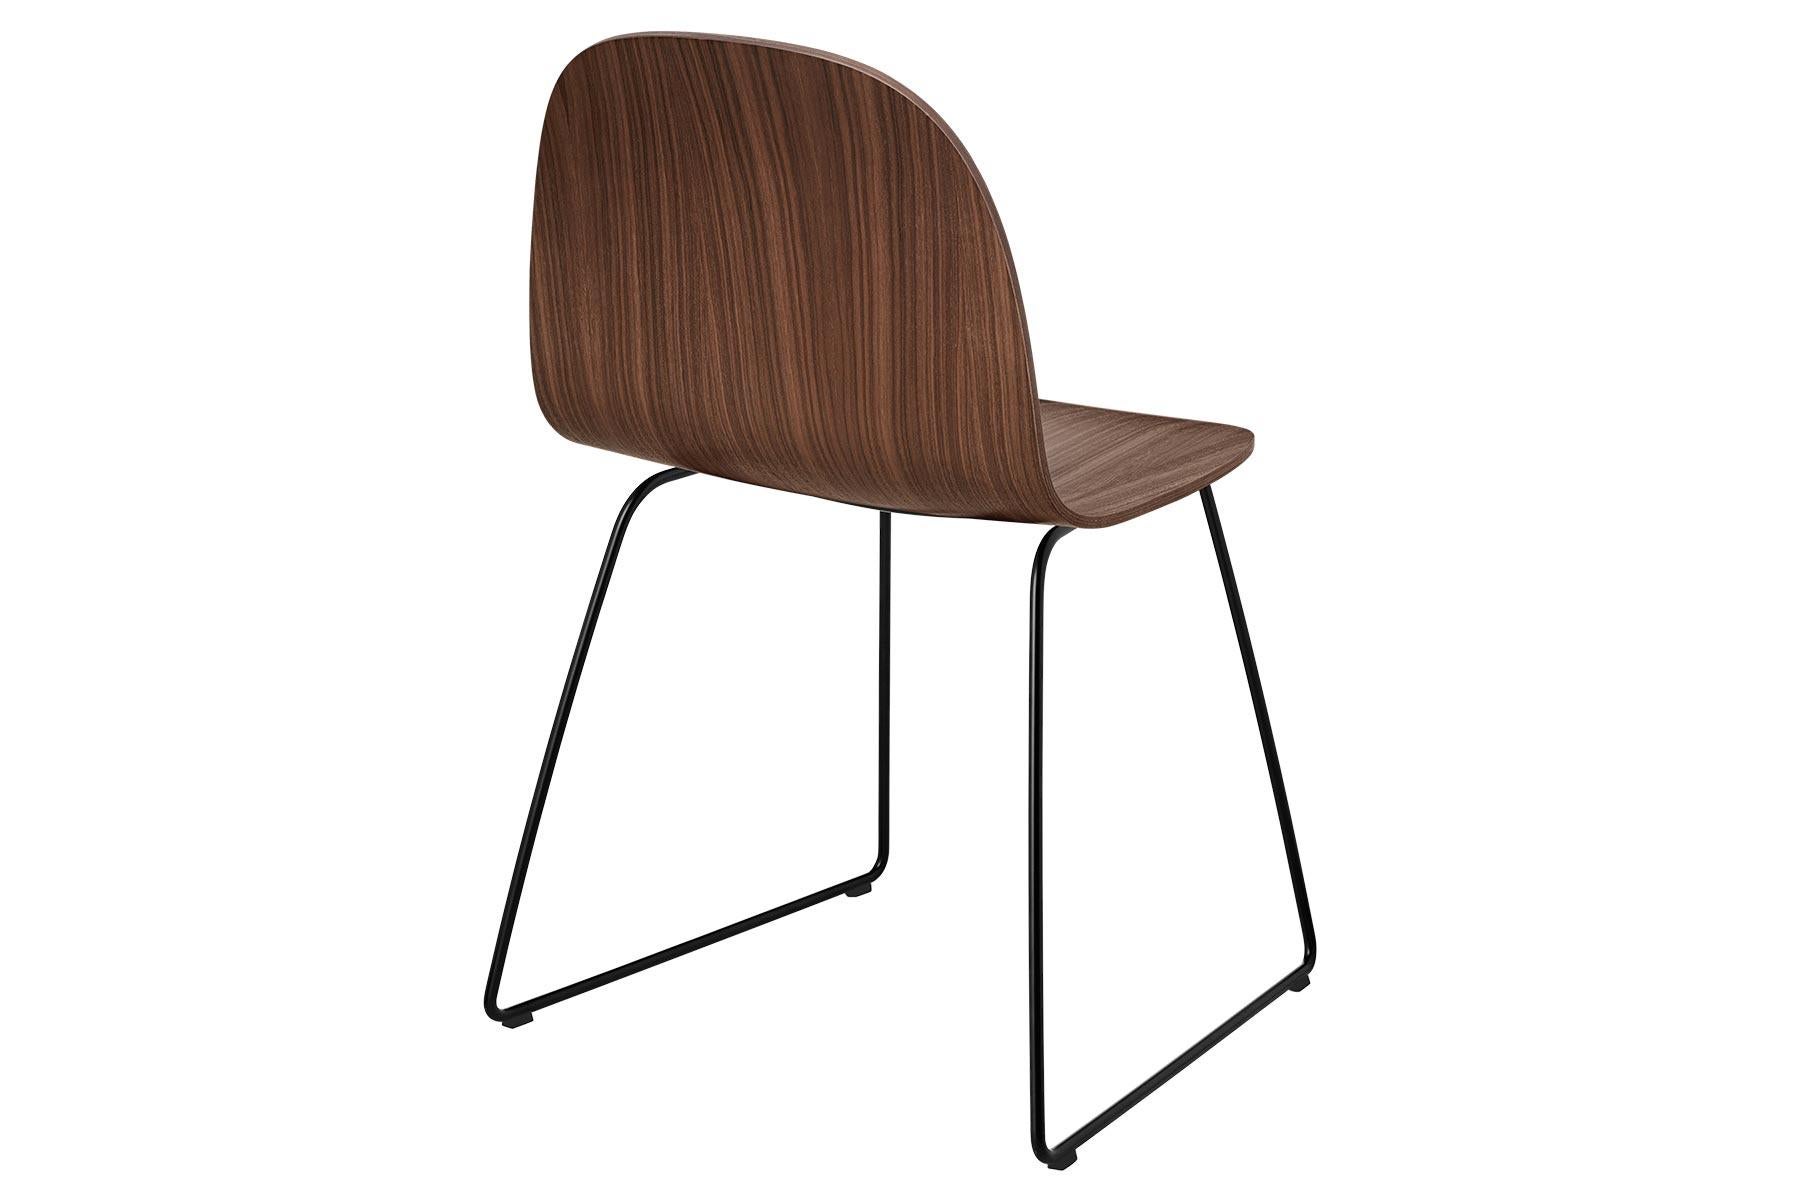 The Gubi 2D Chair is a series of light dining chairs made from laminated veneer with options for front upholstery in a wide range of fabrics and leathers, suitable for both private and public spaces. Being an extension to the Classic Gubi 3D chair,